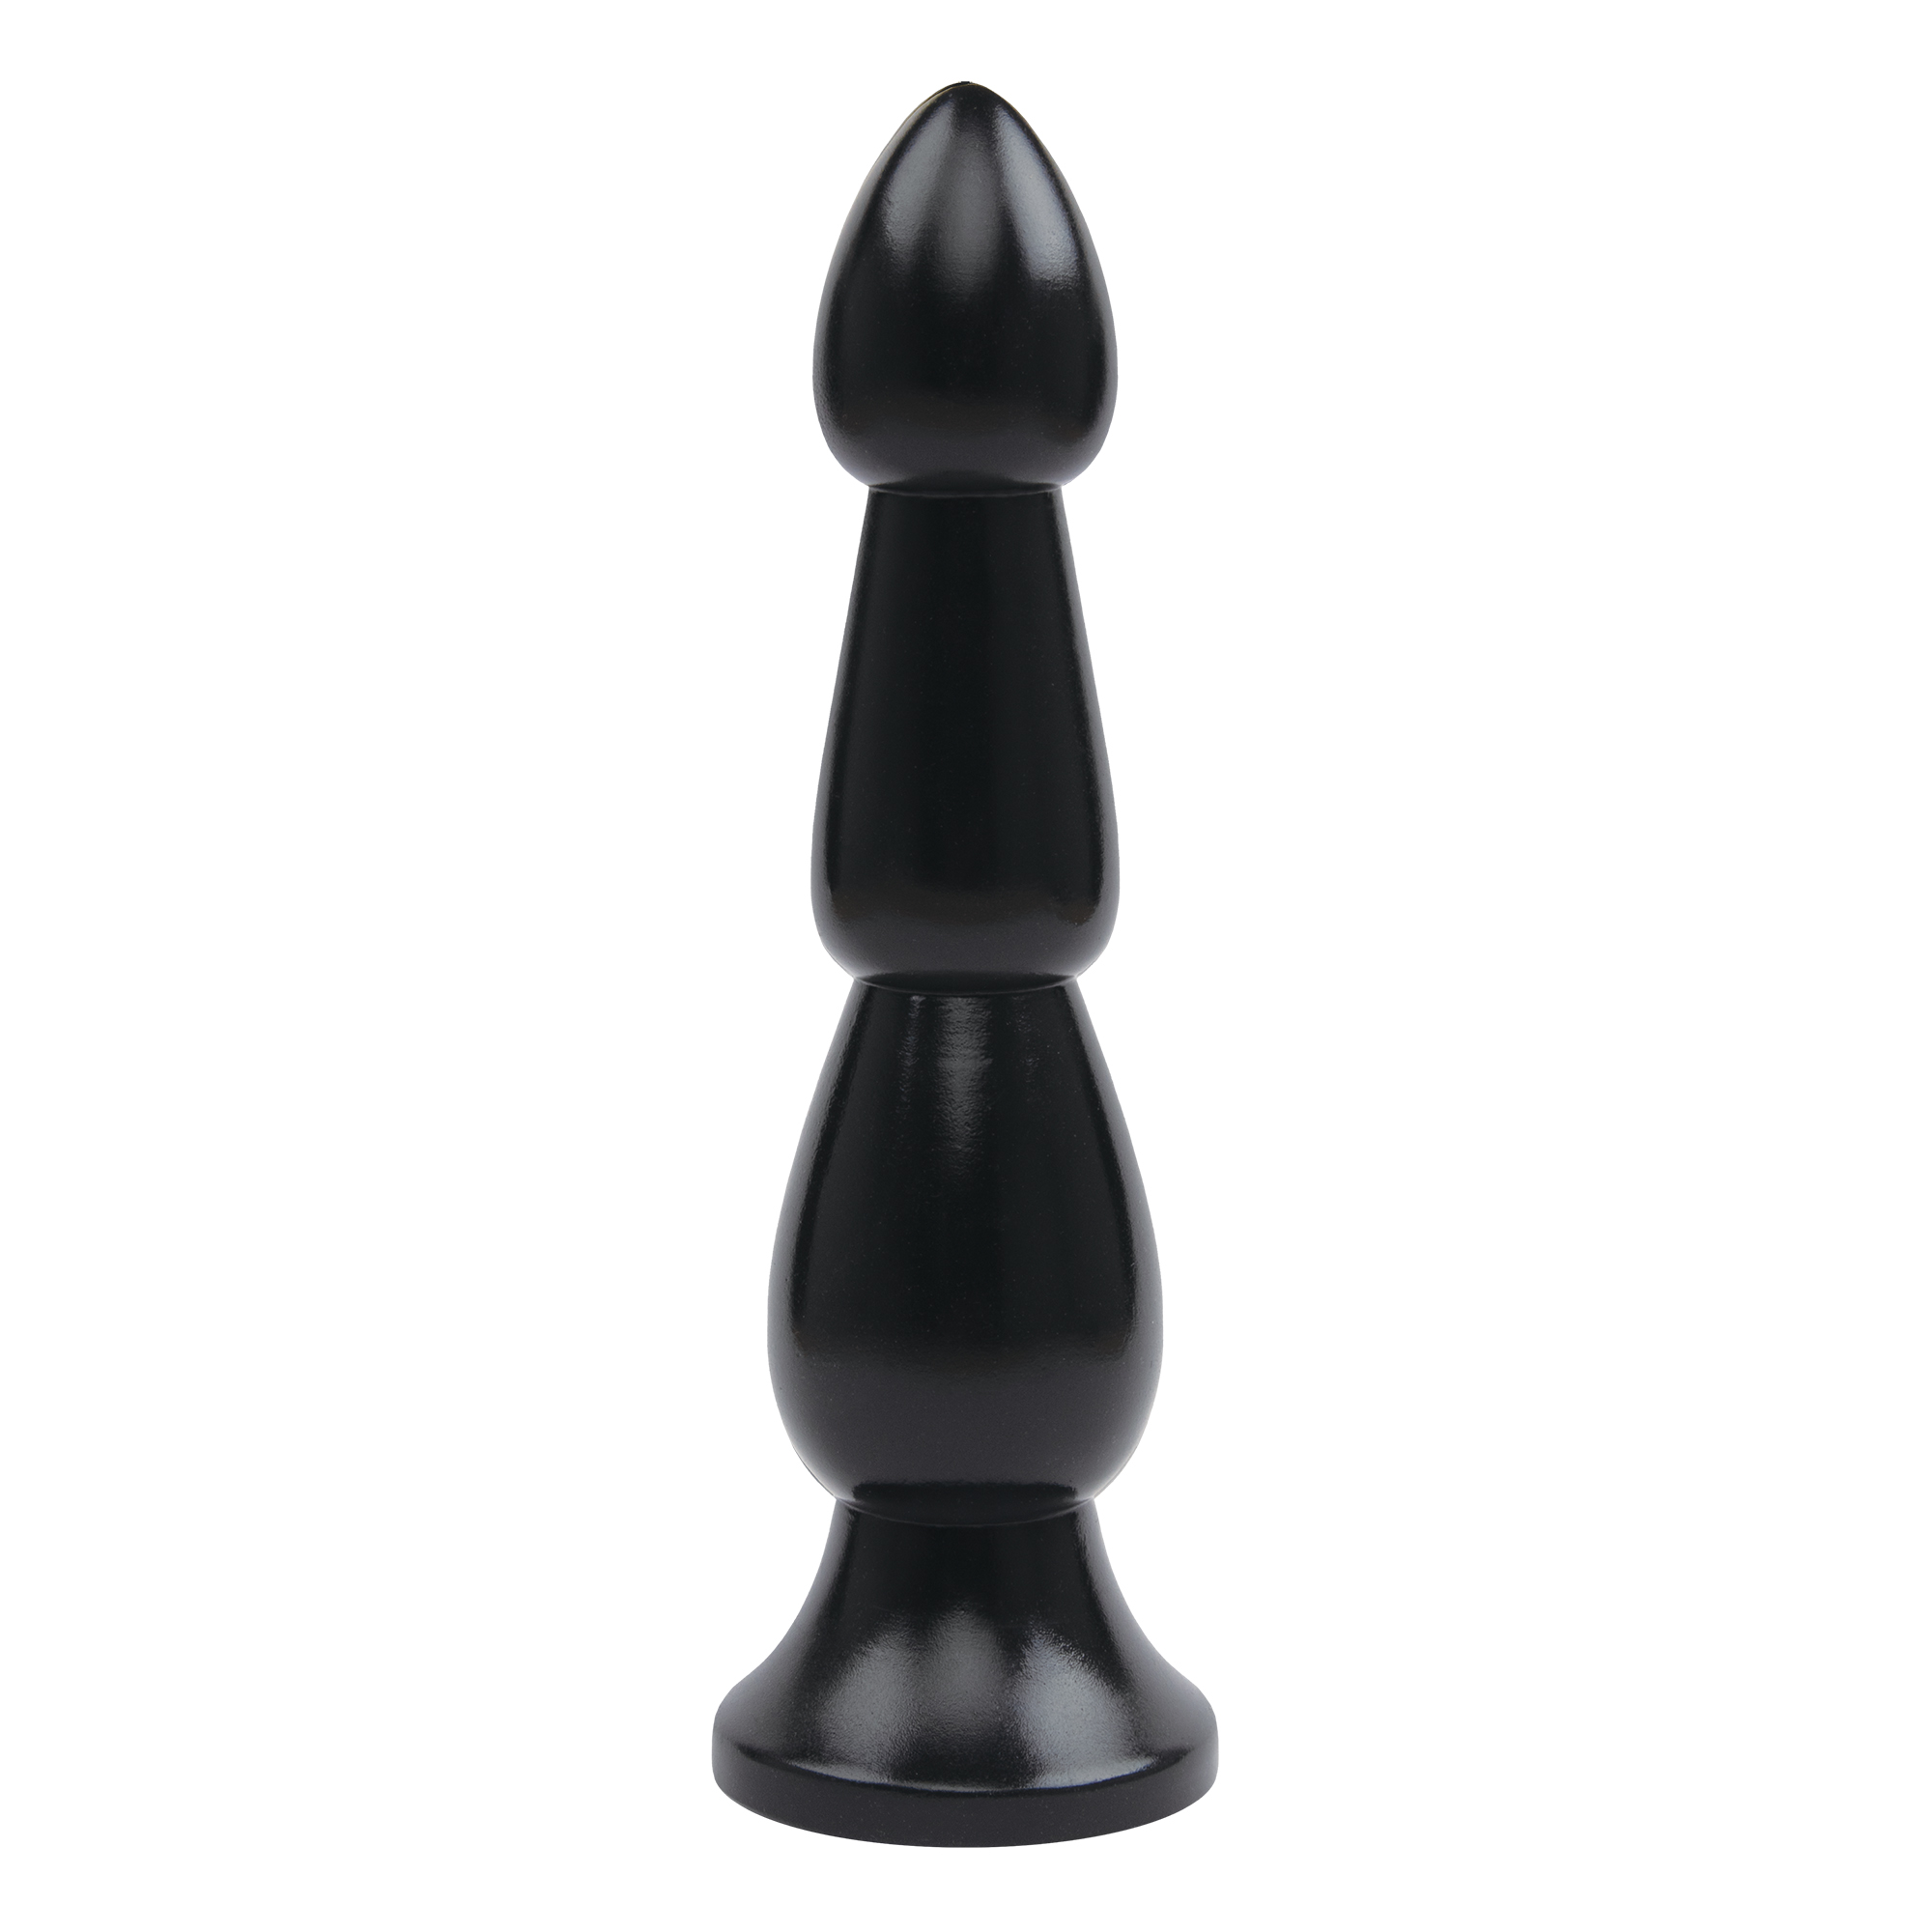 LUX FETISH Ribbed Butt Plug 9"